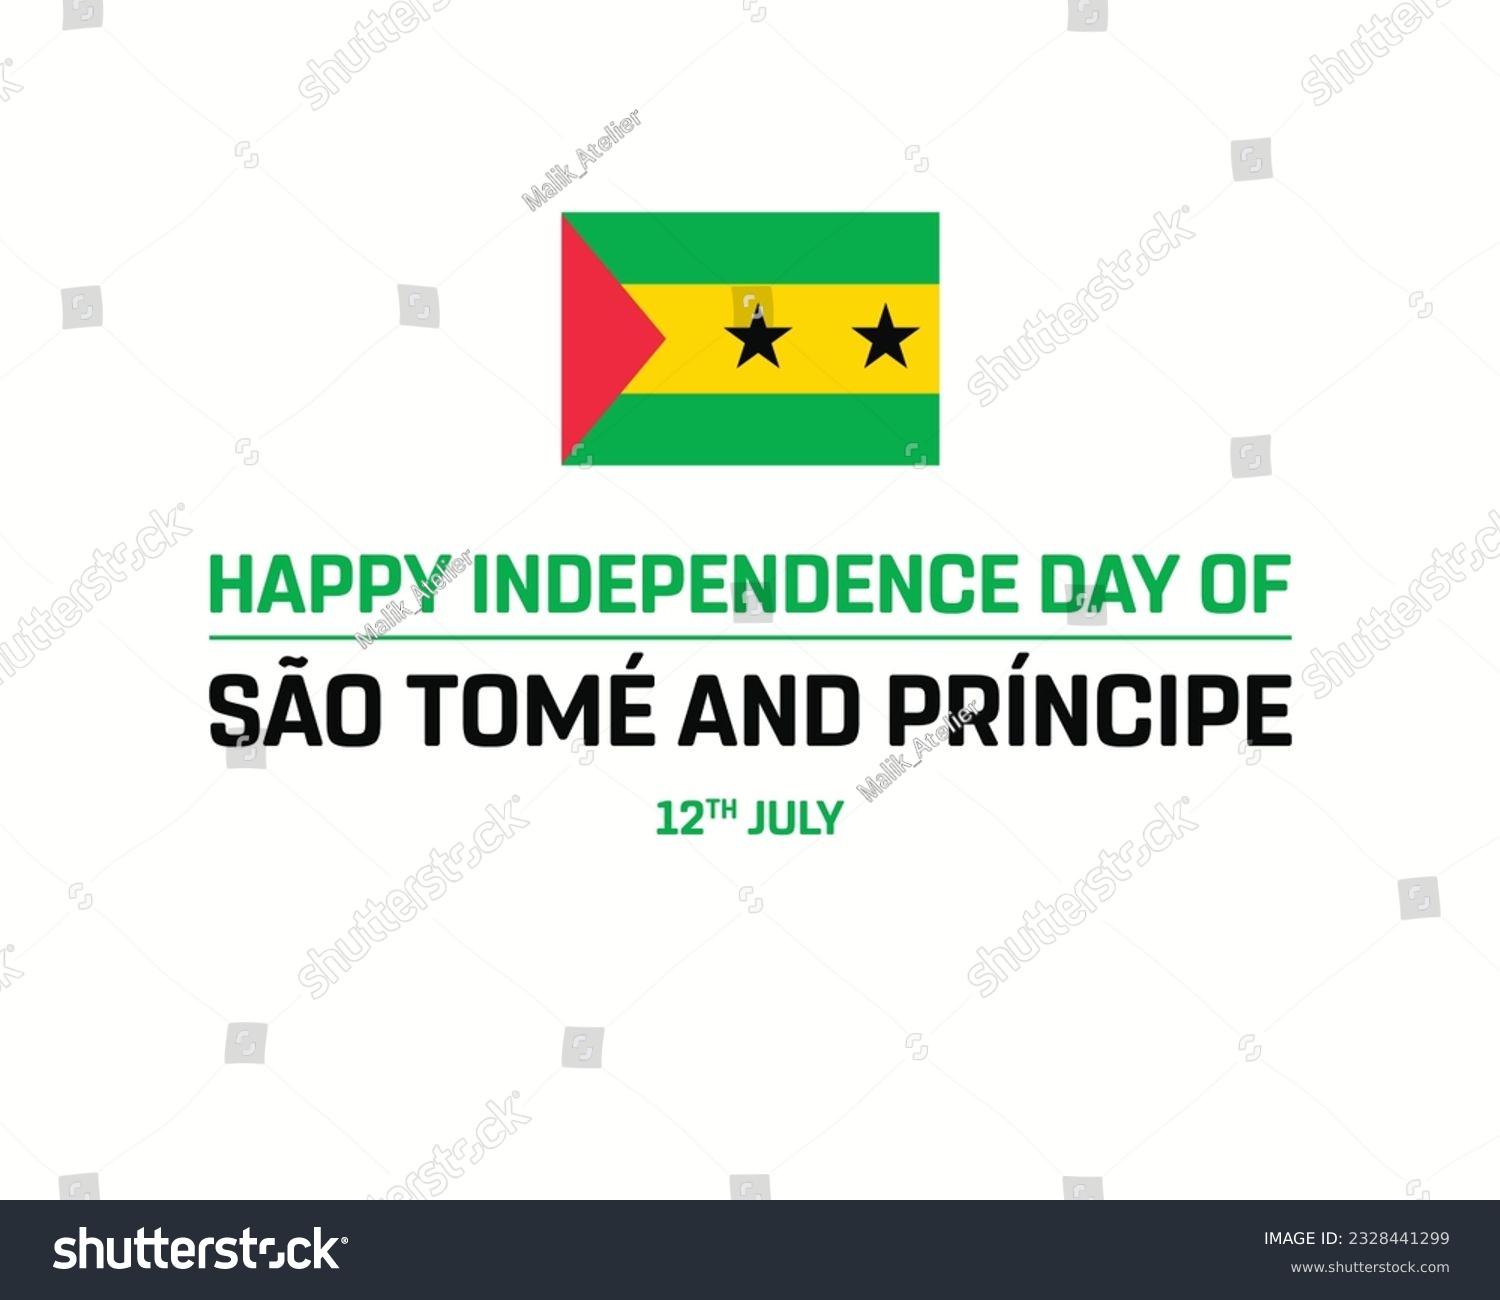 SVG of Happy Independence Day of Sao Tome and Principe, Independence Day of Sao Tome and Principe, Sao Tome and Principe, Flag, 12 July, National Day svg